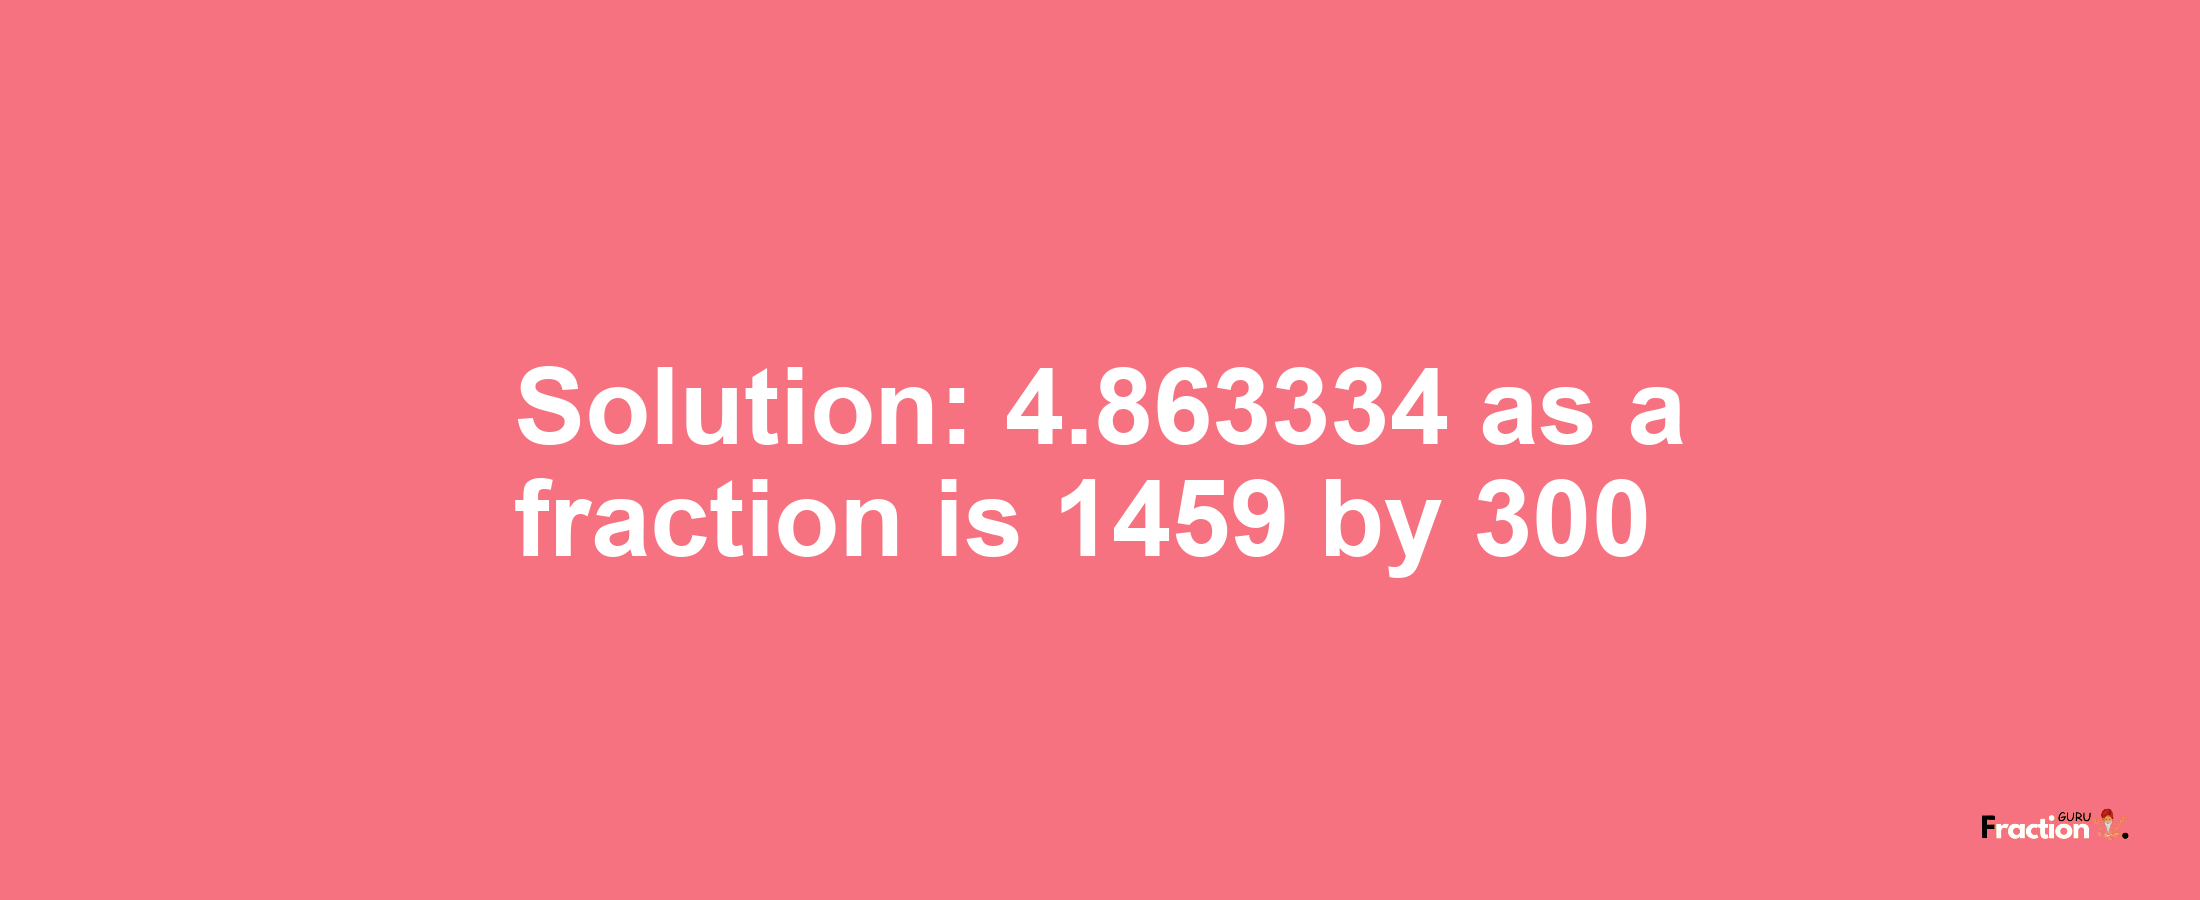 Solution:4.863334 as a fraction is 1459/300